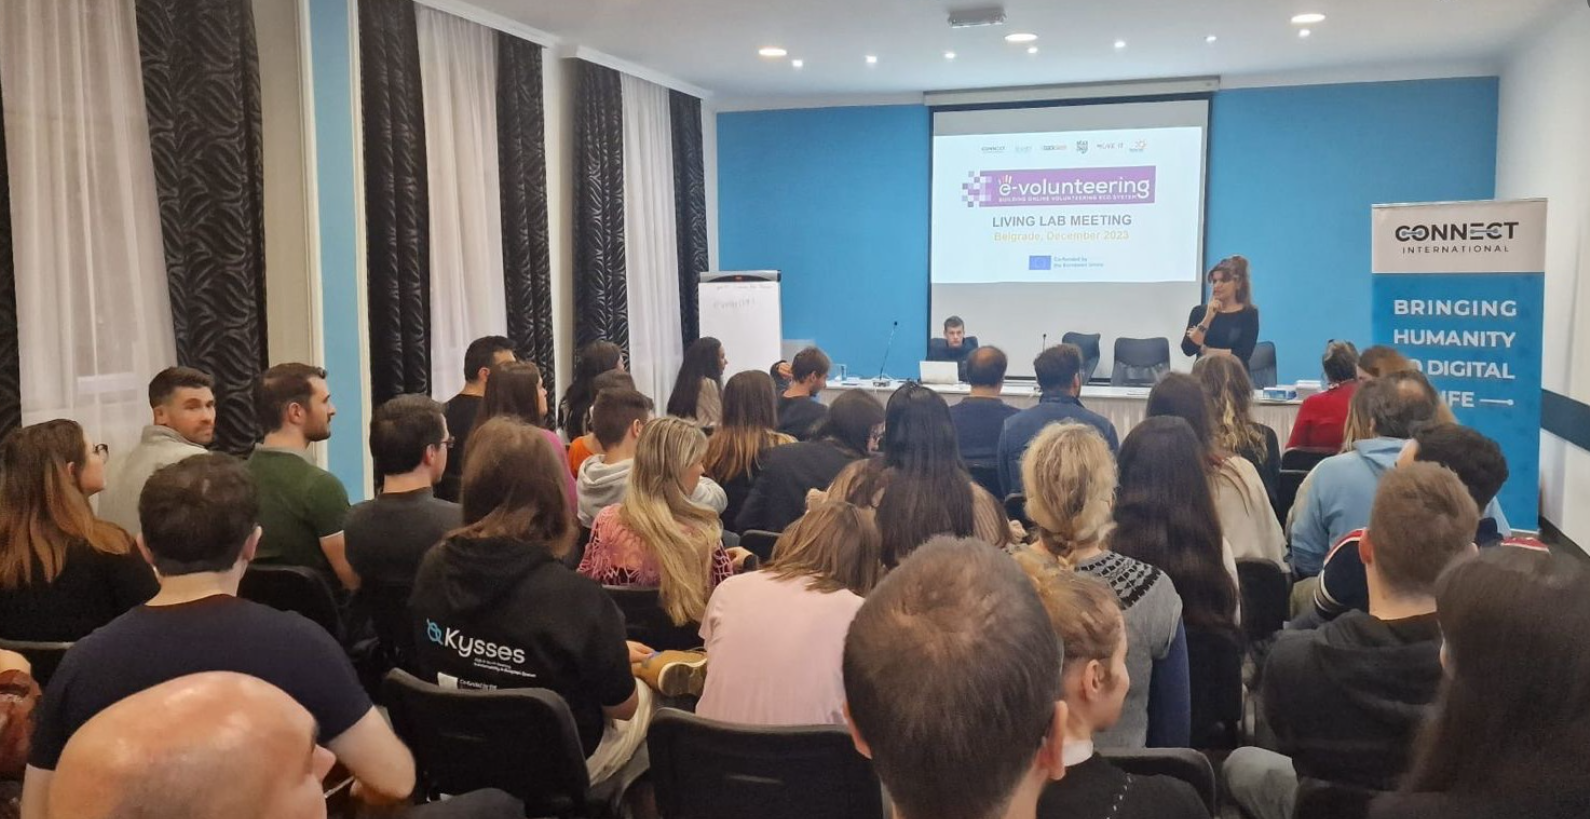 You are currently viewing E-volunteering Living Lab Meeting Held in Belgrade